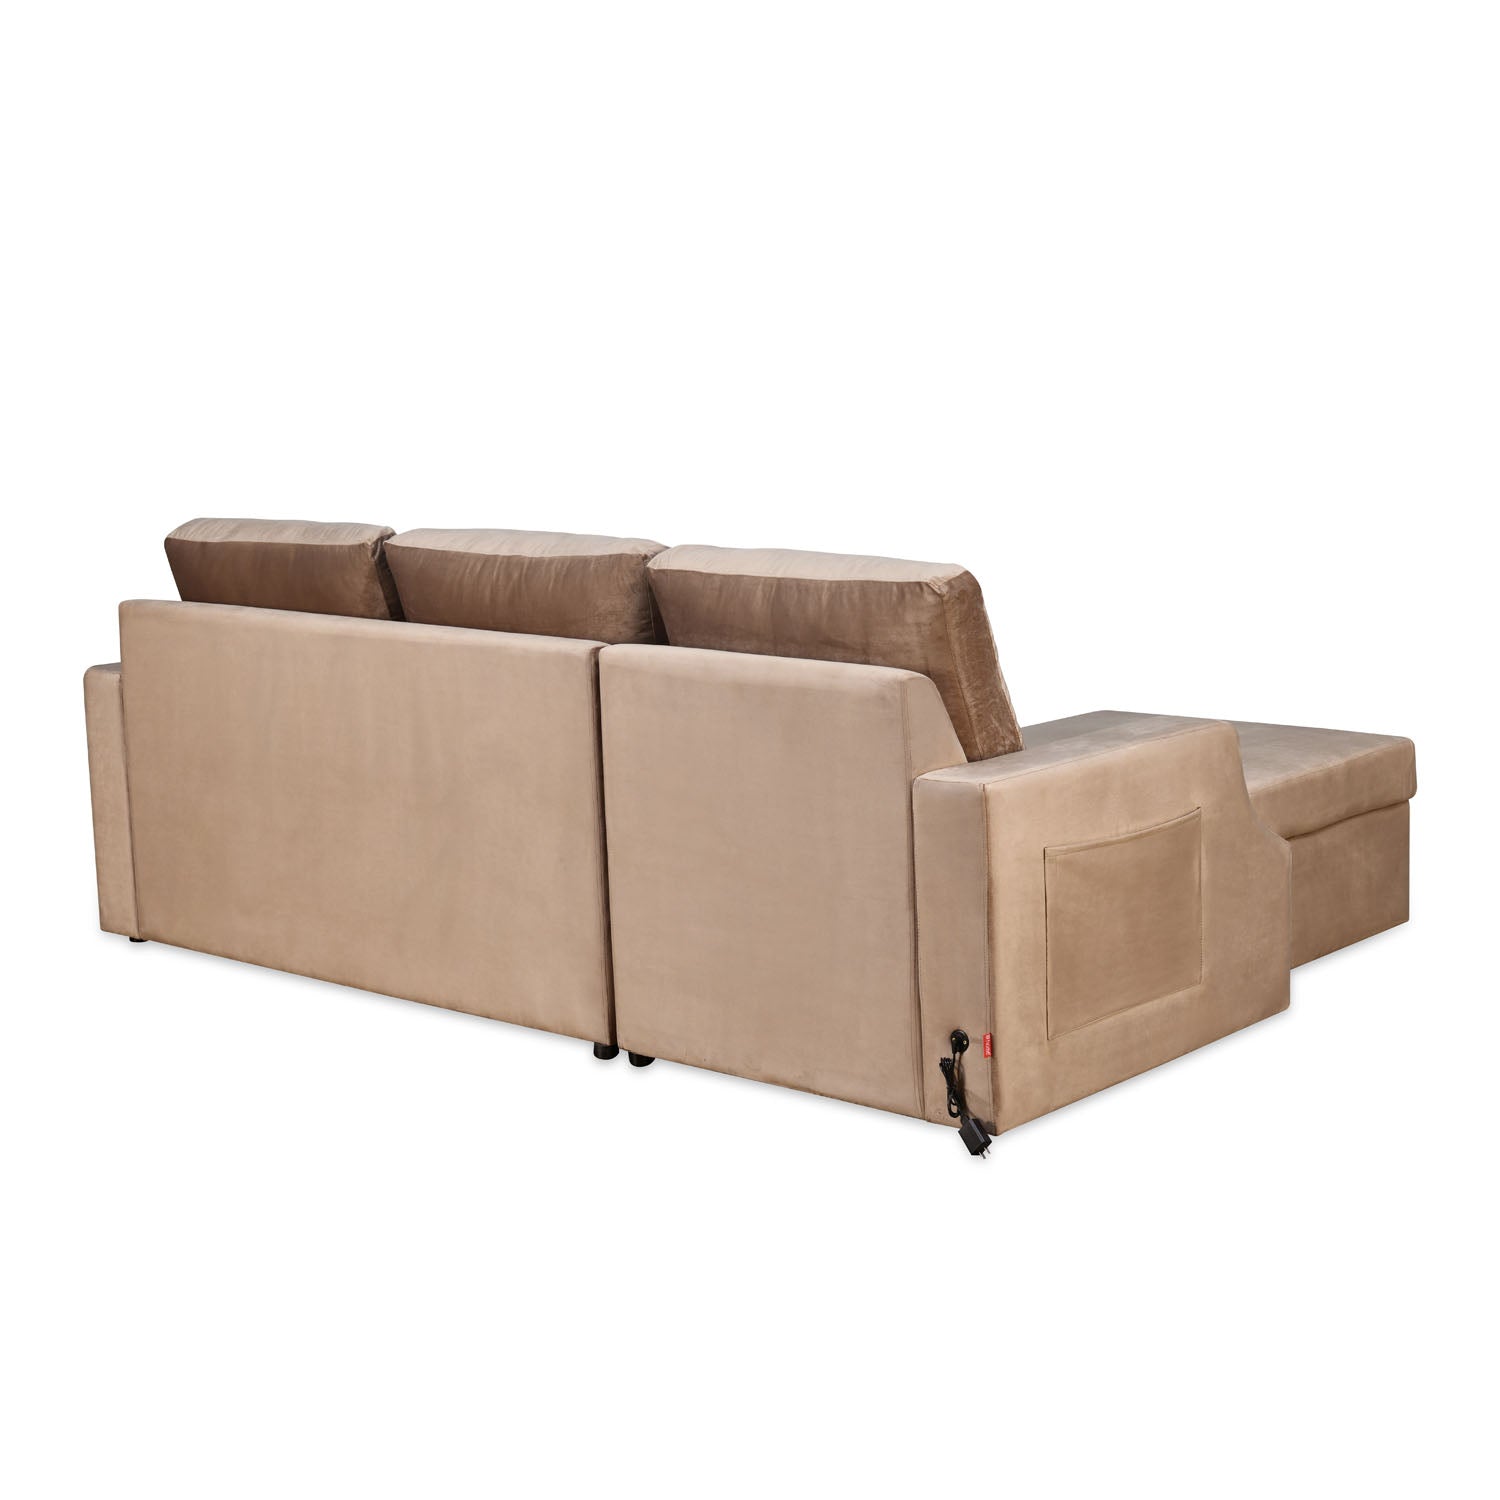 Portland RHS Sofa With Lounger & Storage (Light Brown)